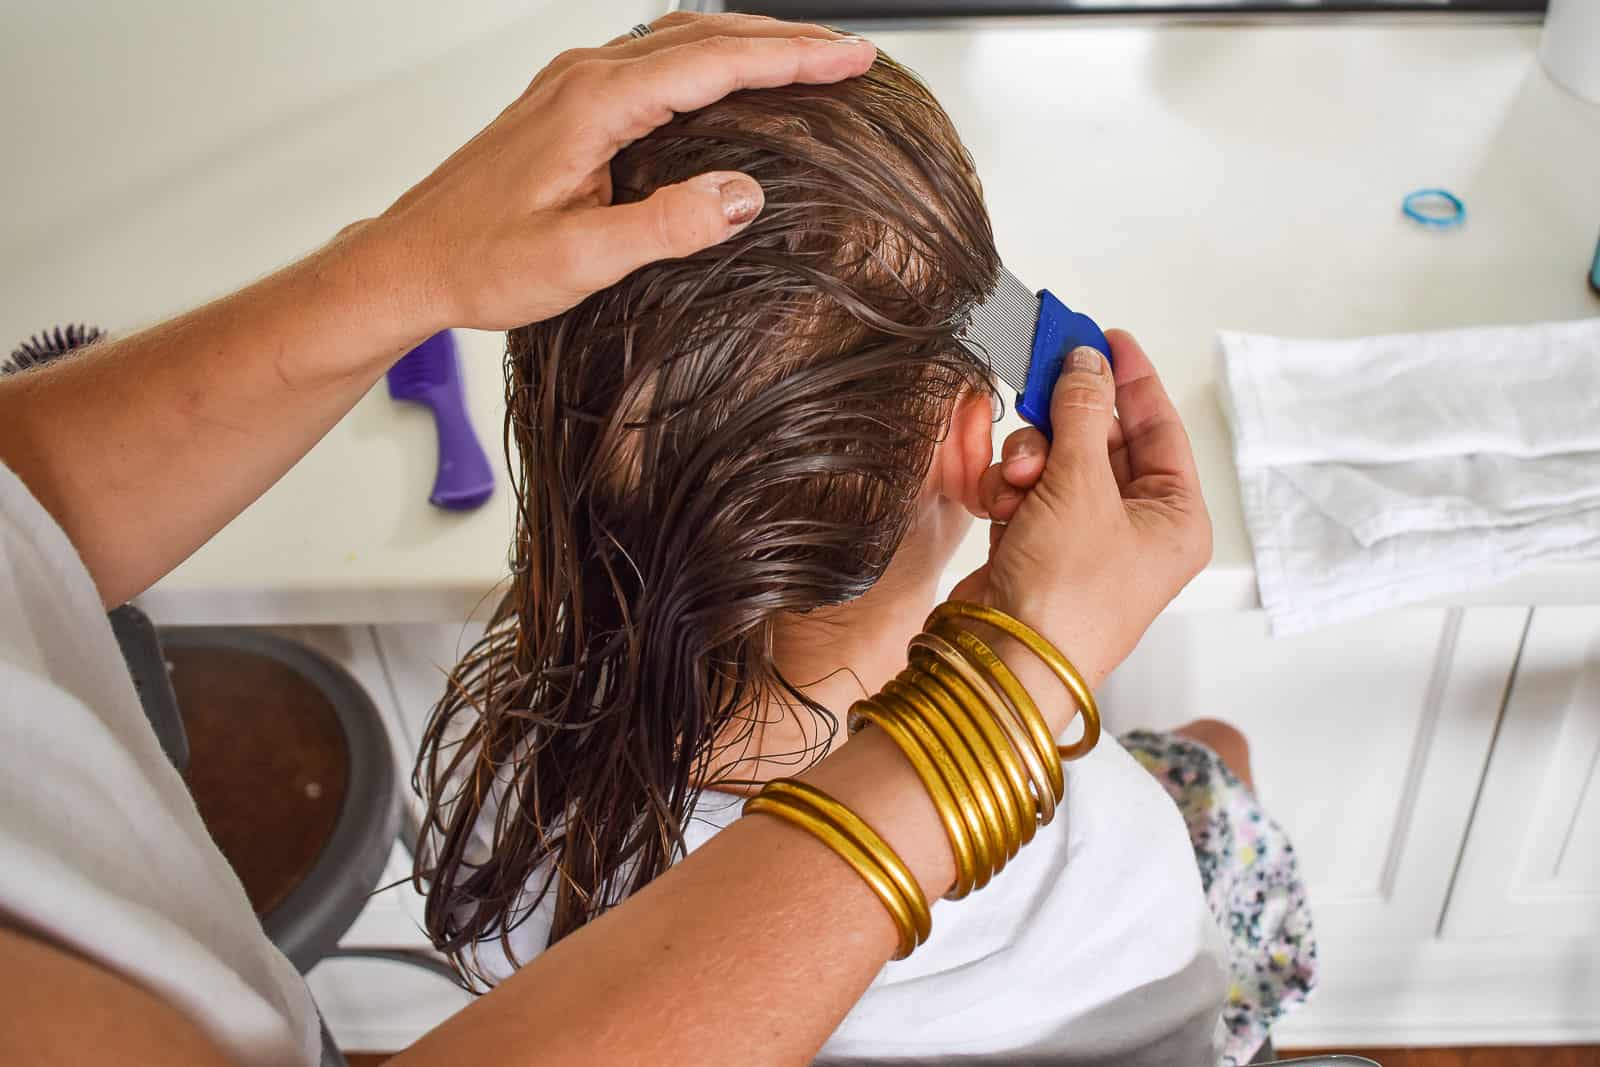 second direction for lice removal is from ear to ear